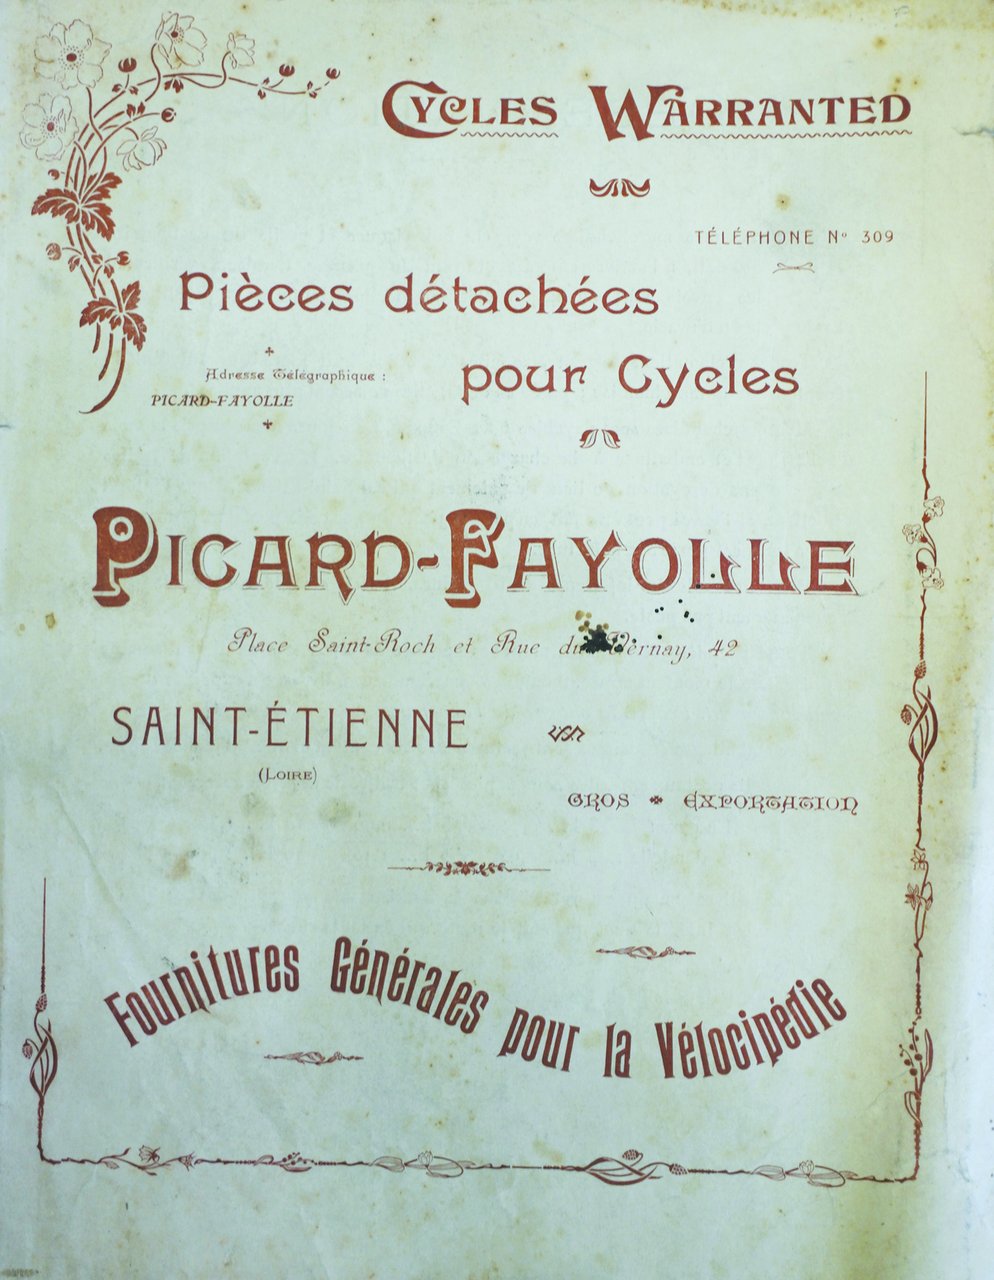 PICARD-FAYOLLE": FOURNITURES GENERALES POUR LA VELOCIPEDIE.